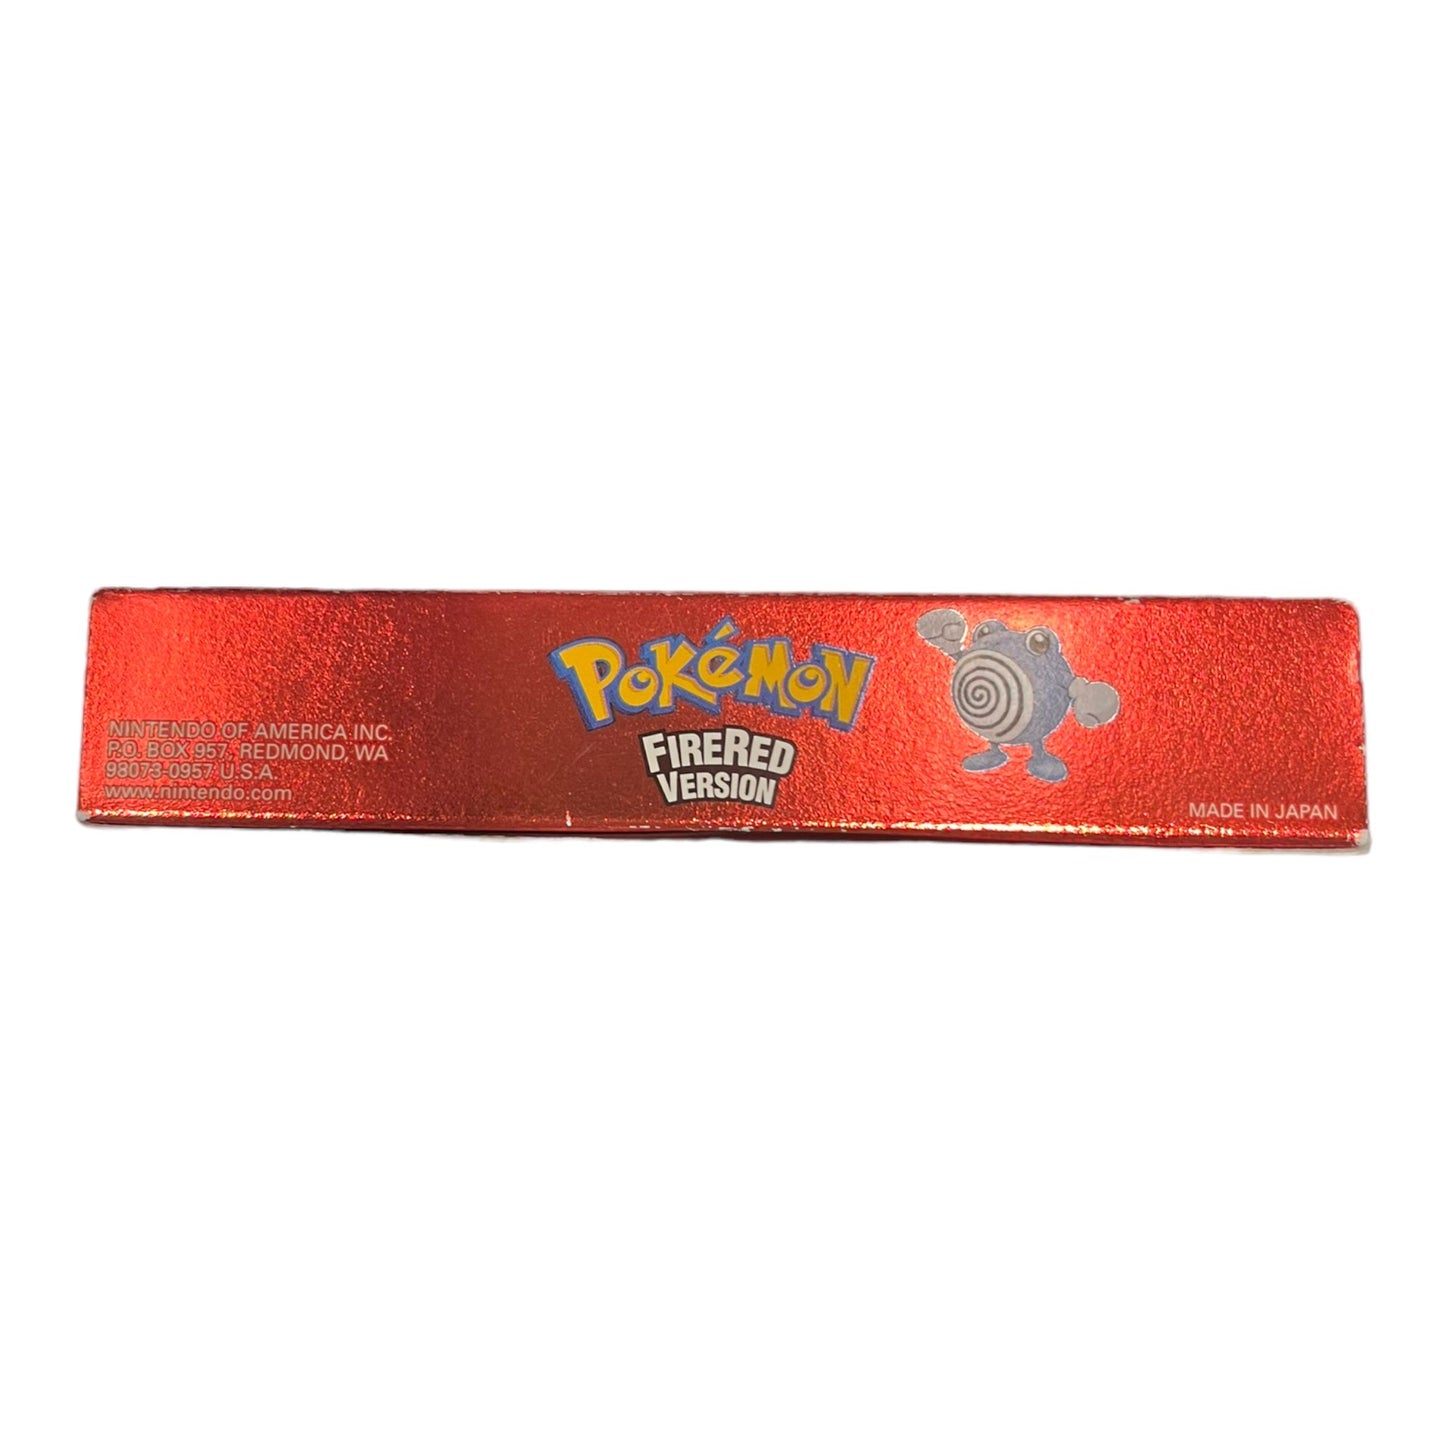 Pokémon Fire Red *Player’s Choice edition*